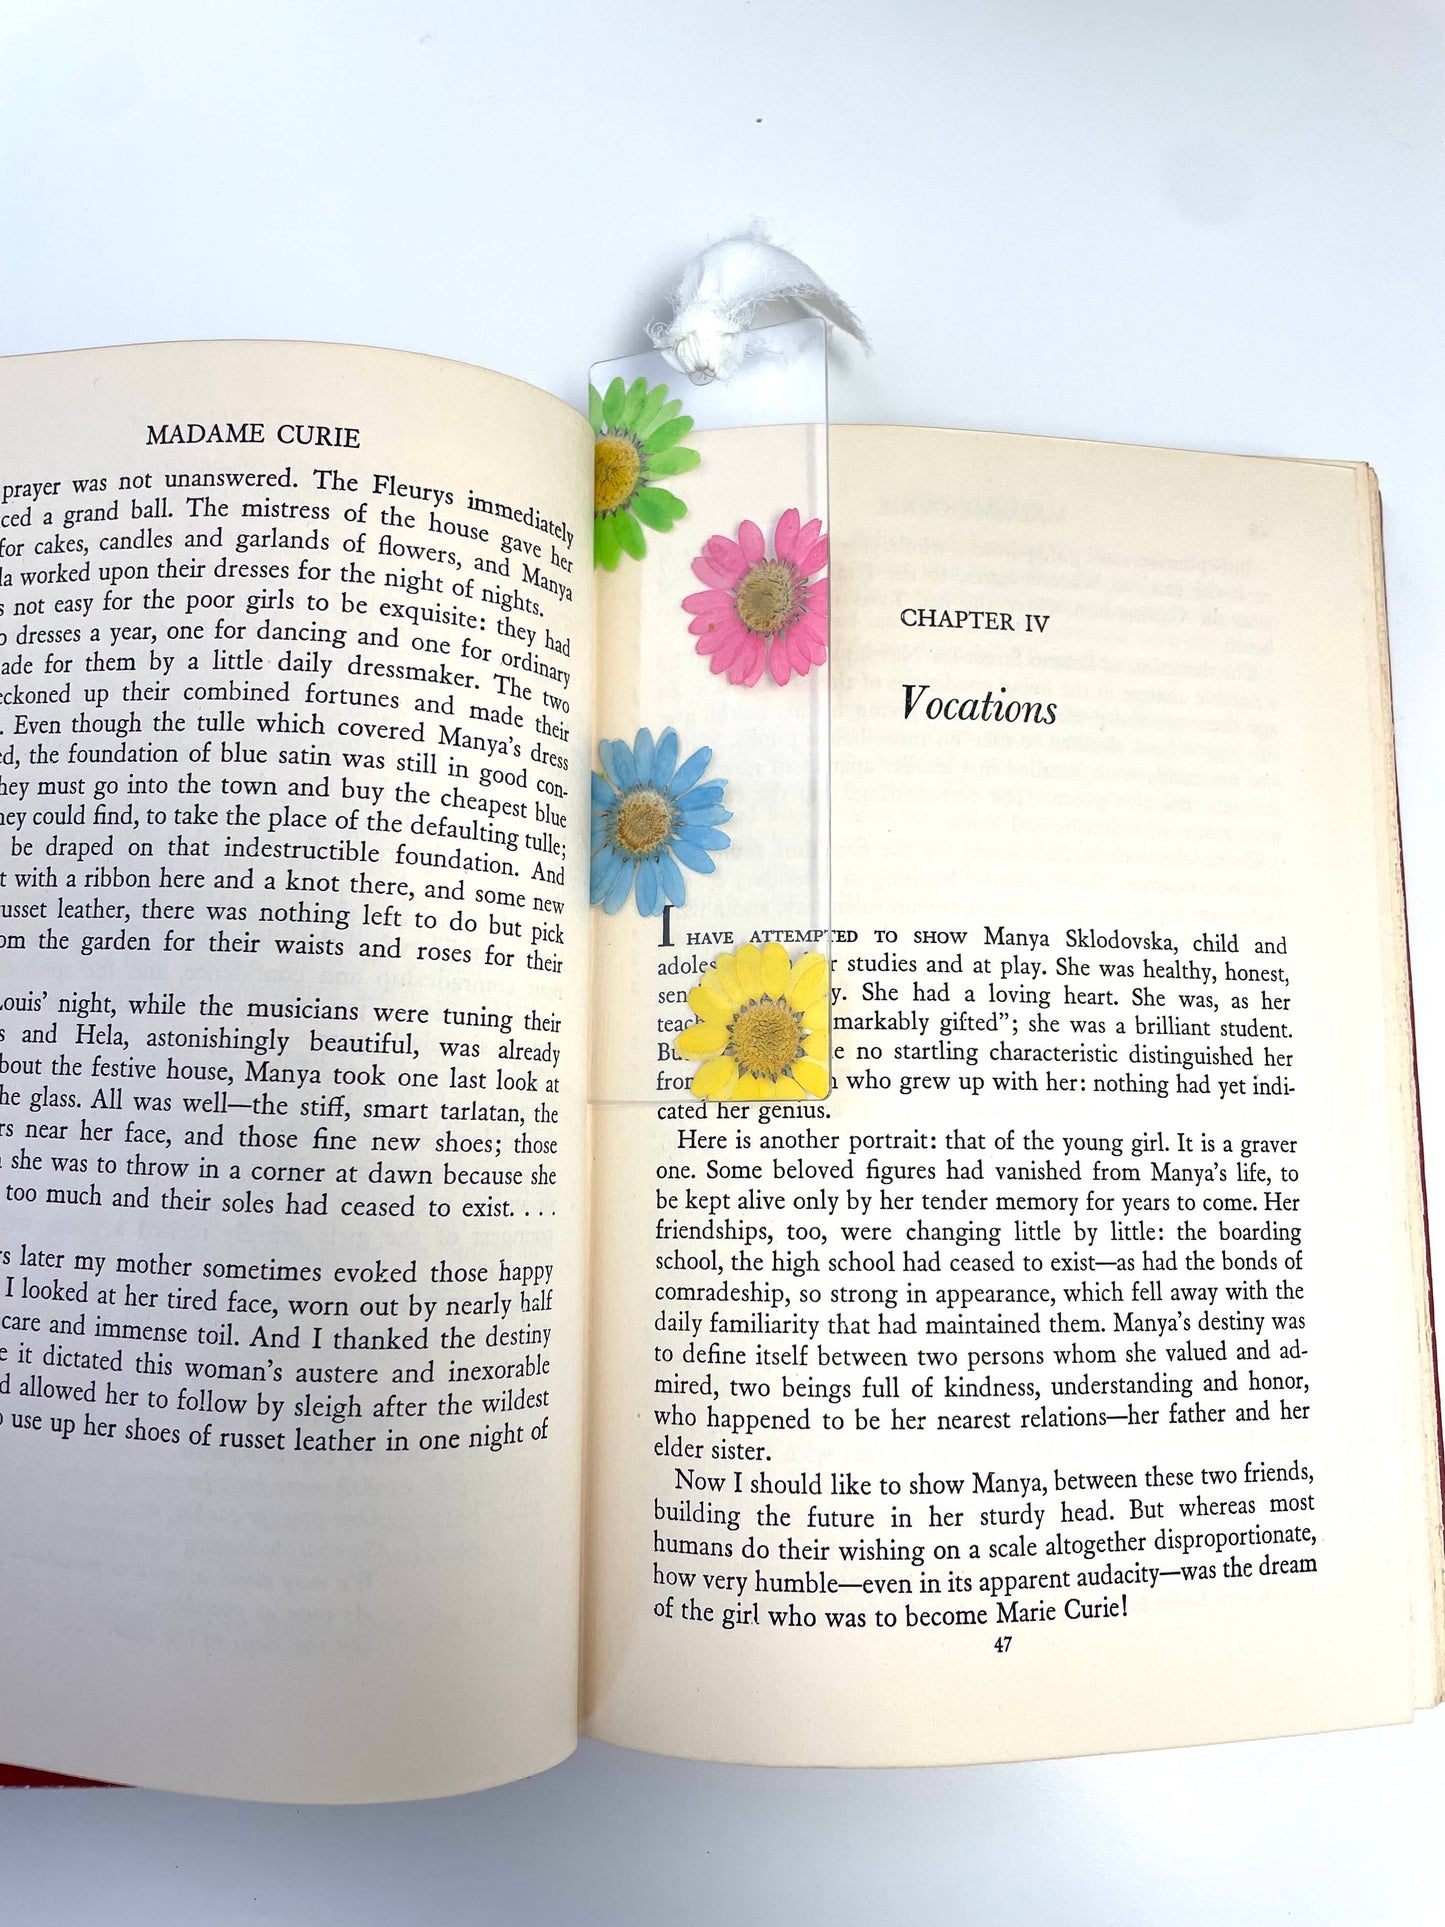 Pressed Flower Bookmark - Made With Real Flowers